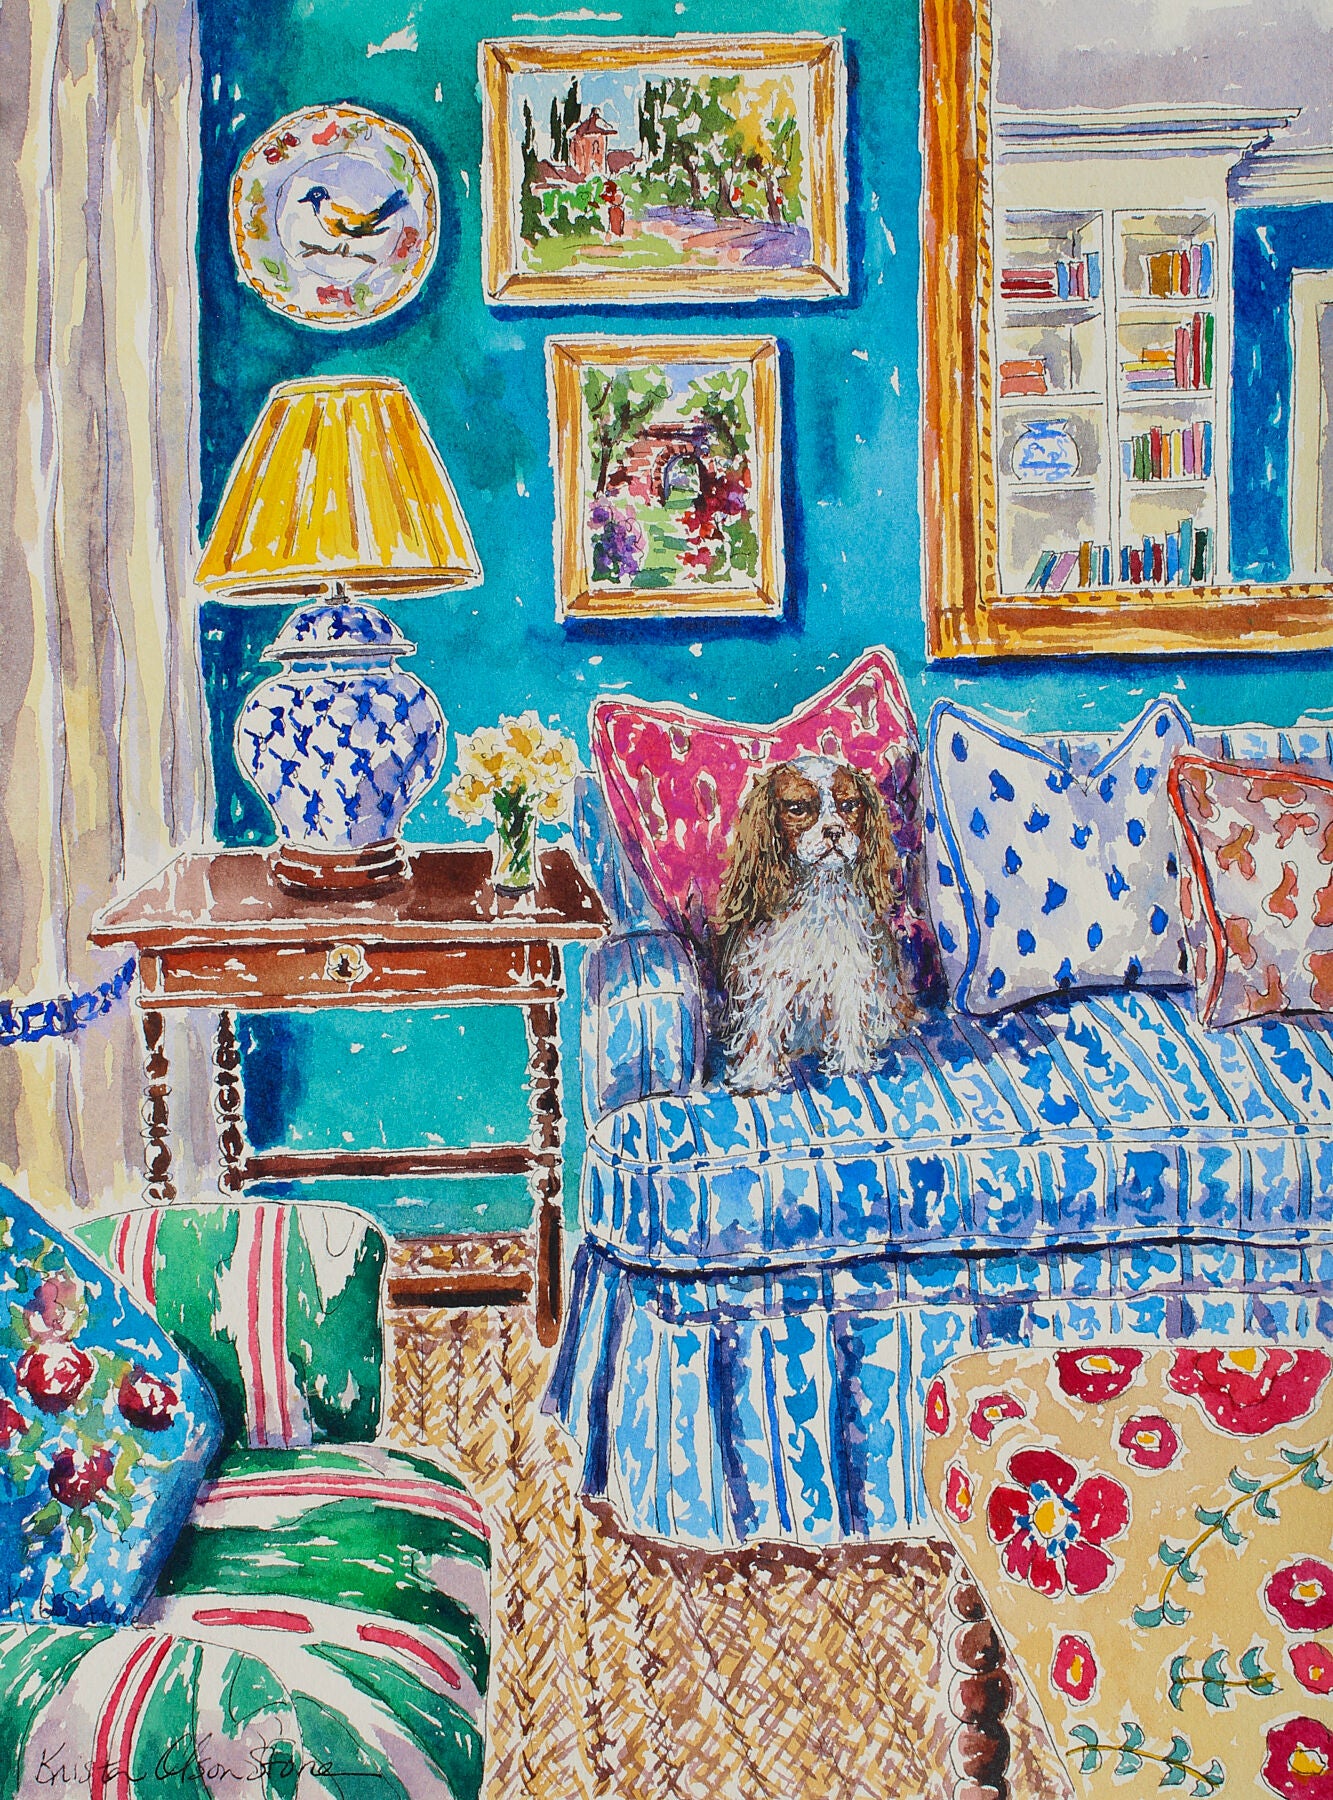 A limited edition print of a detailed watercolor and ink painting of a king charles spaniel sitting in a decorated room with beautiful blues and teal colors.  